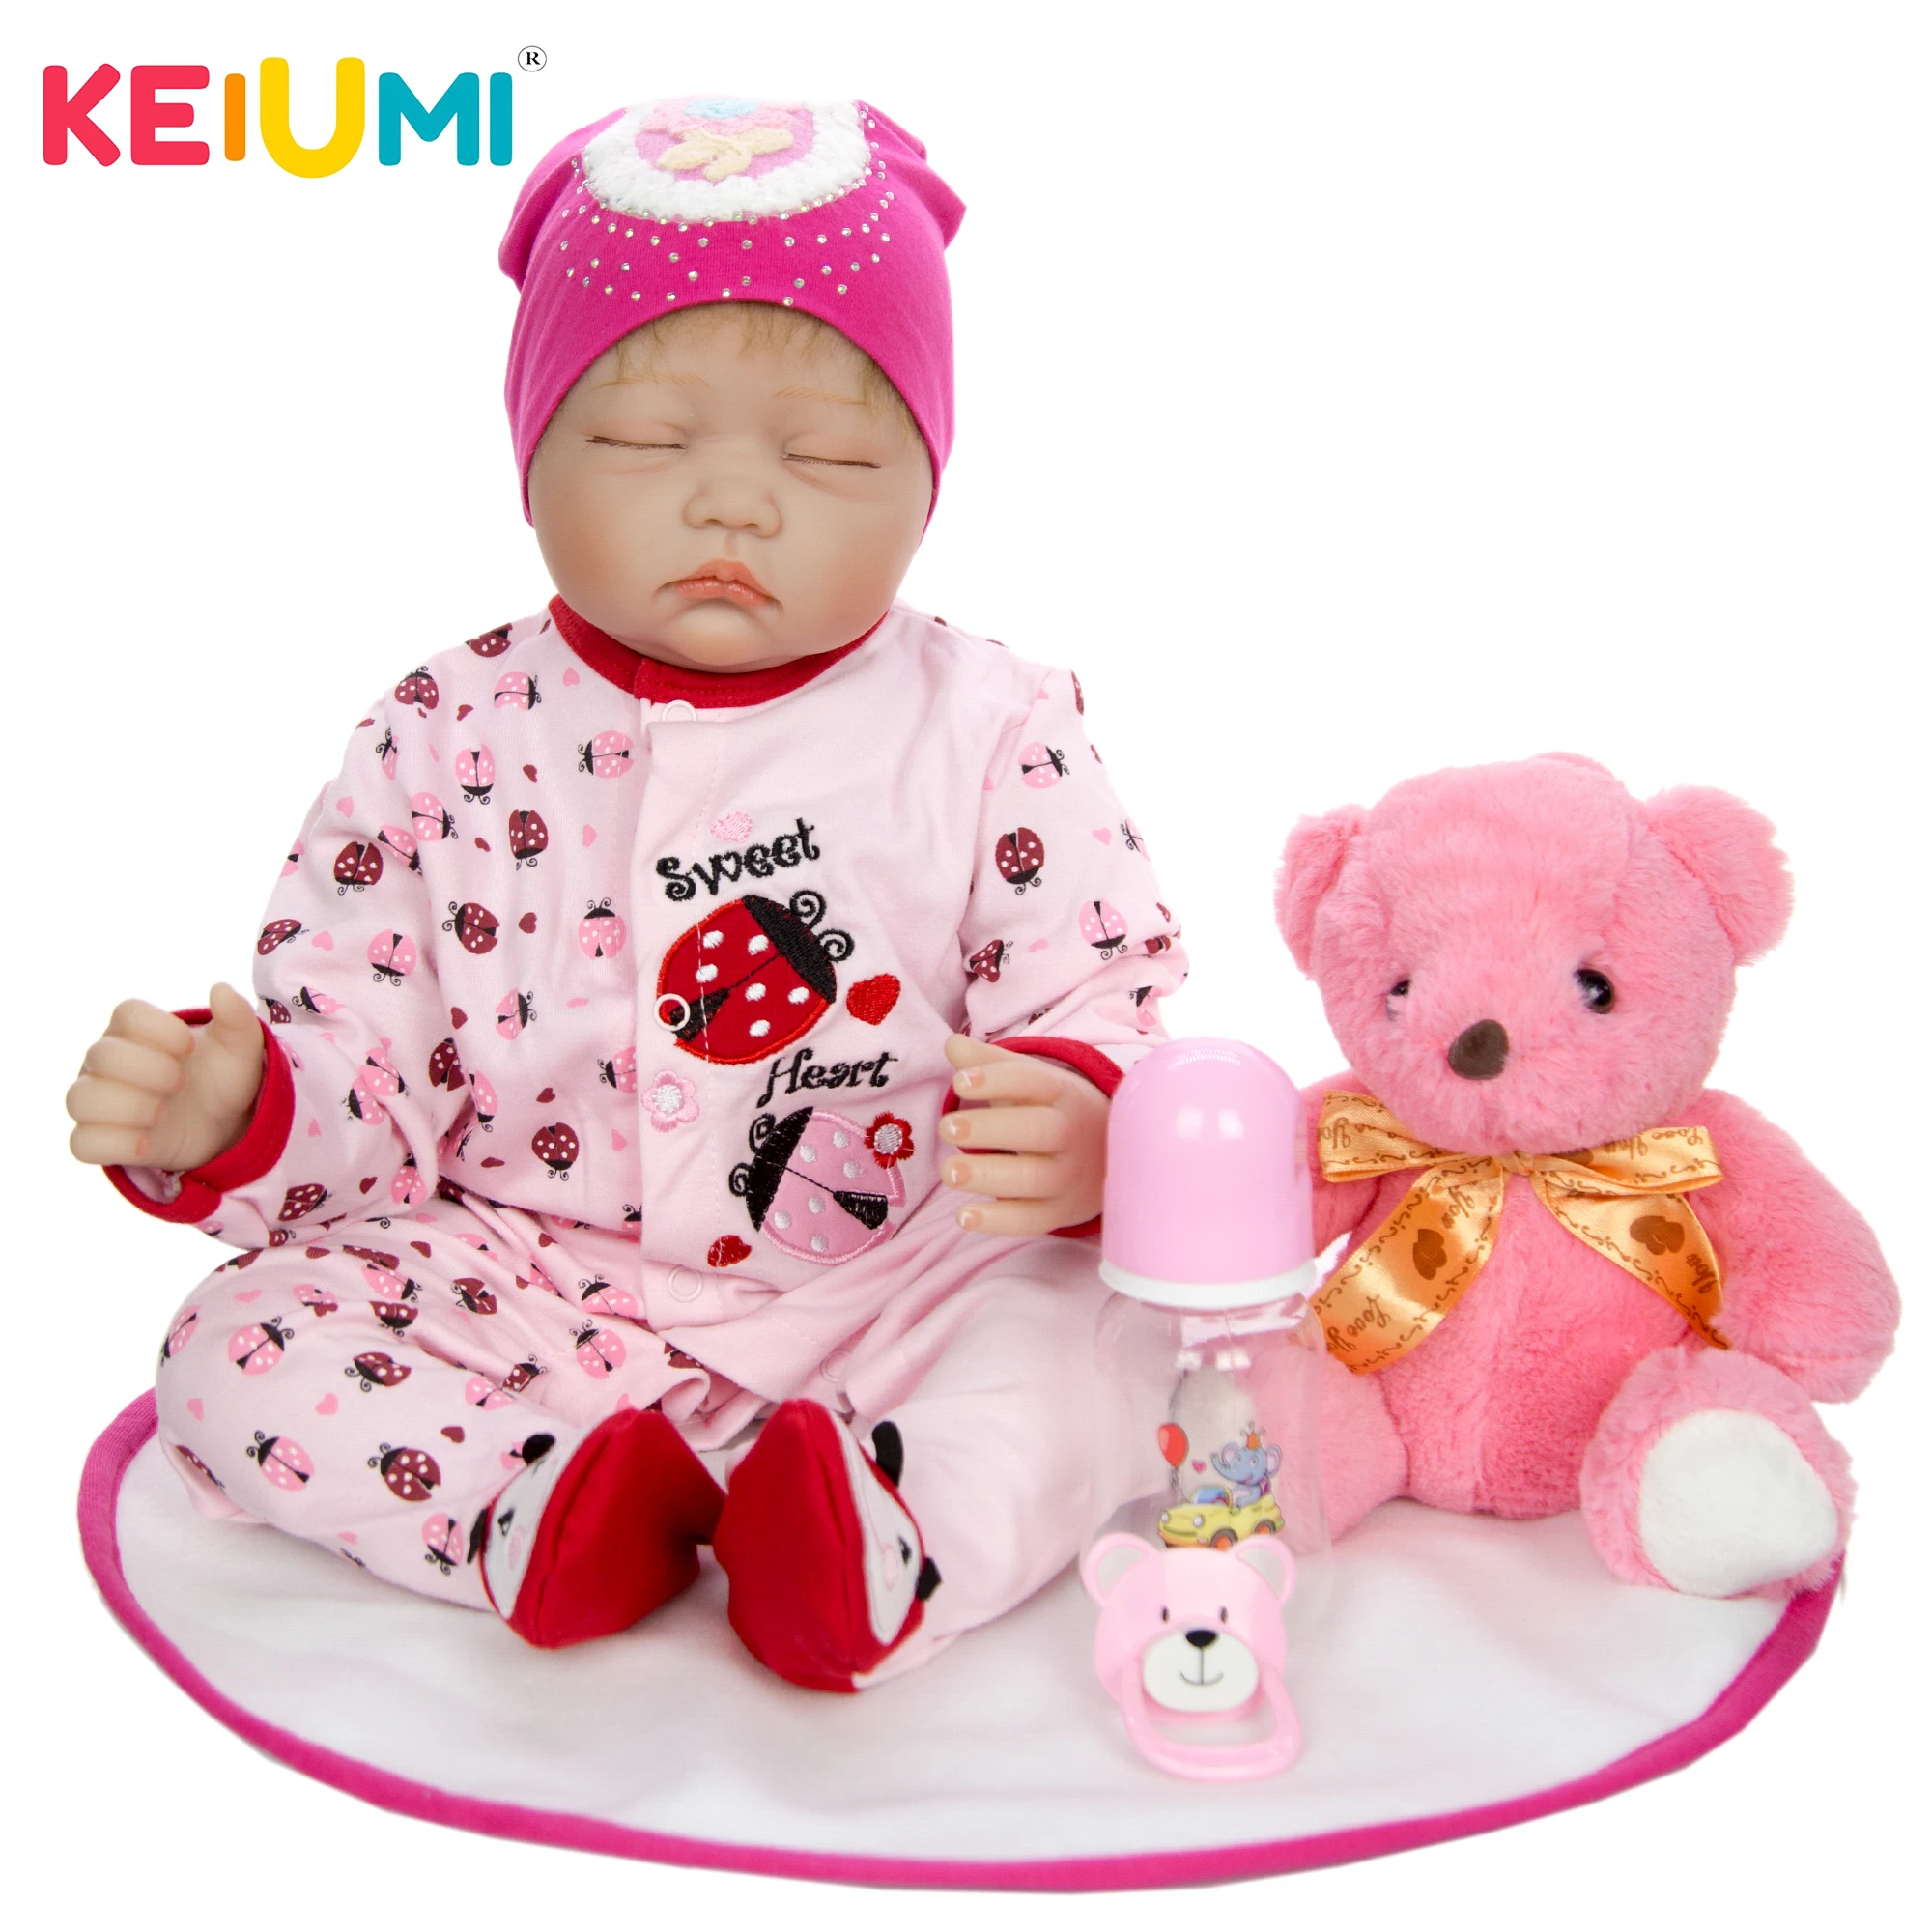 

KEIUMI New 22 Inch Lifelike Sleeping Soft Silicone Reborn Baby Doll Kid Playmate Gift Alive Soft Toys Bouquets Baby Reborn Toy